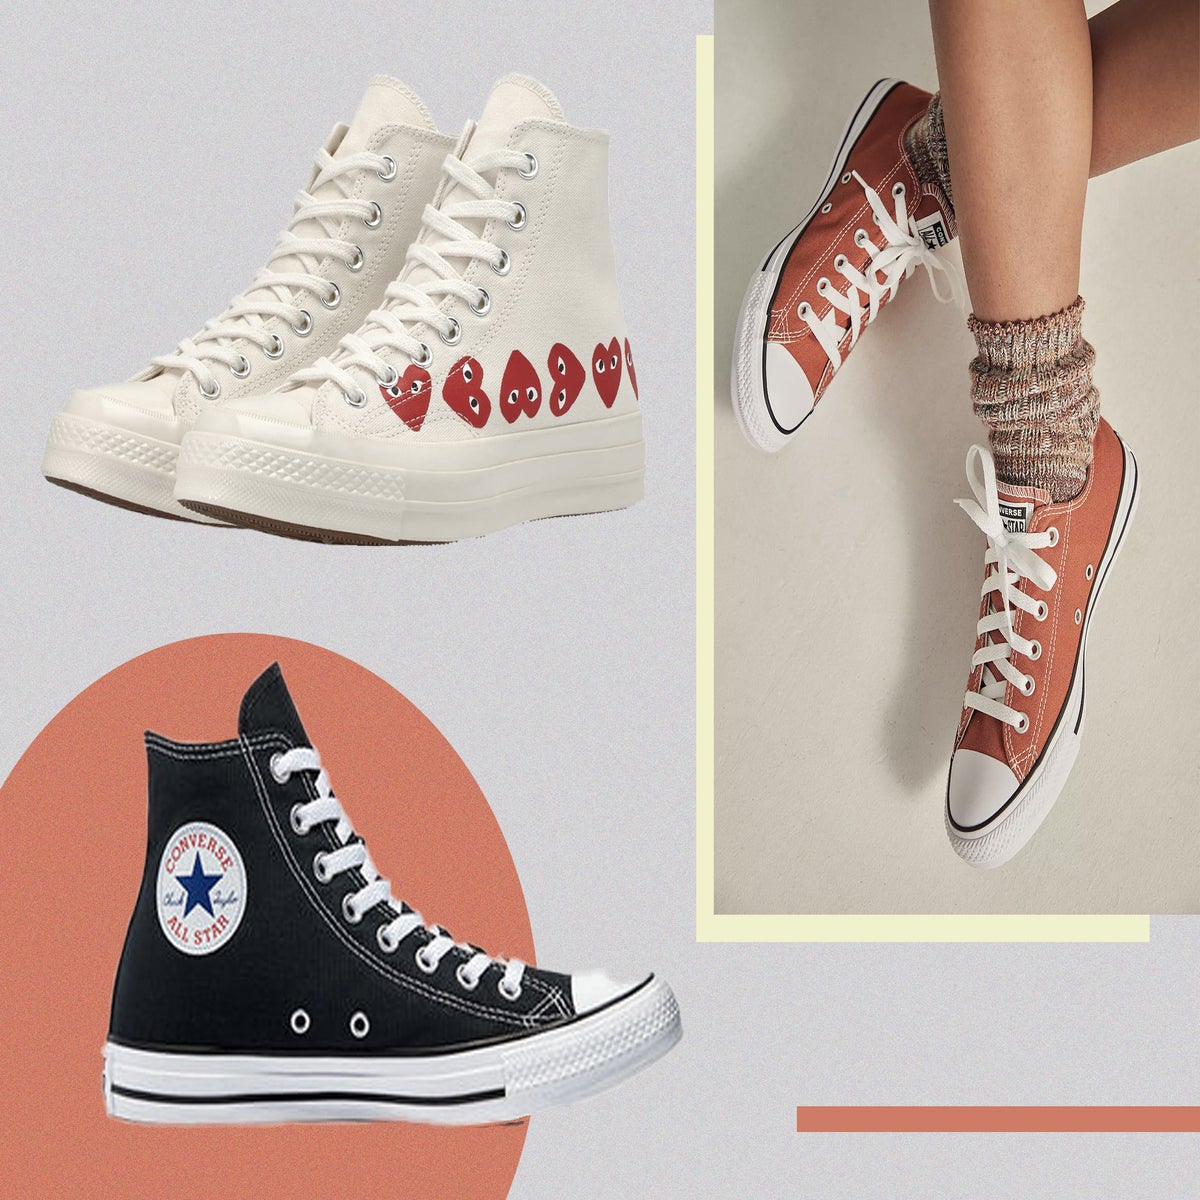 Converse trainers buying High tops, run star, Comme Des Garcons more | The Independent